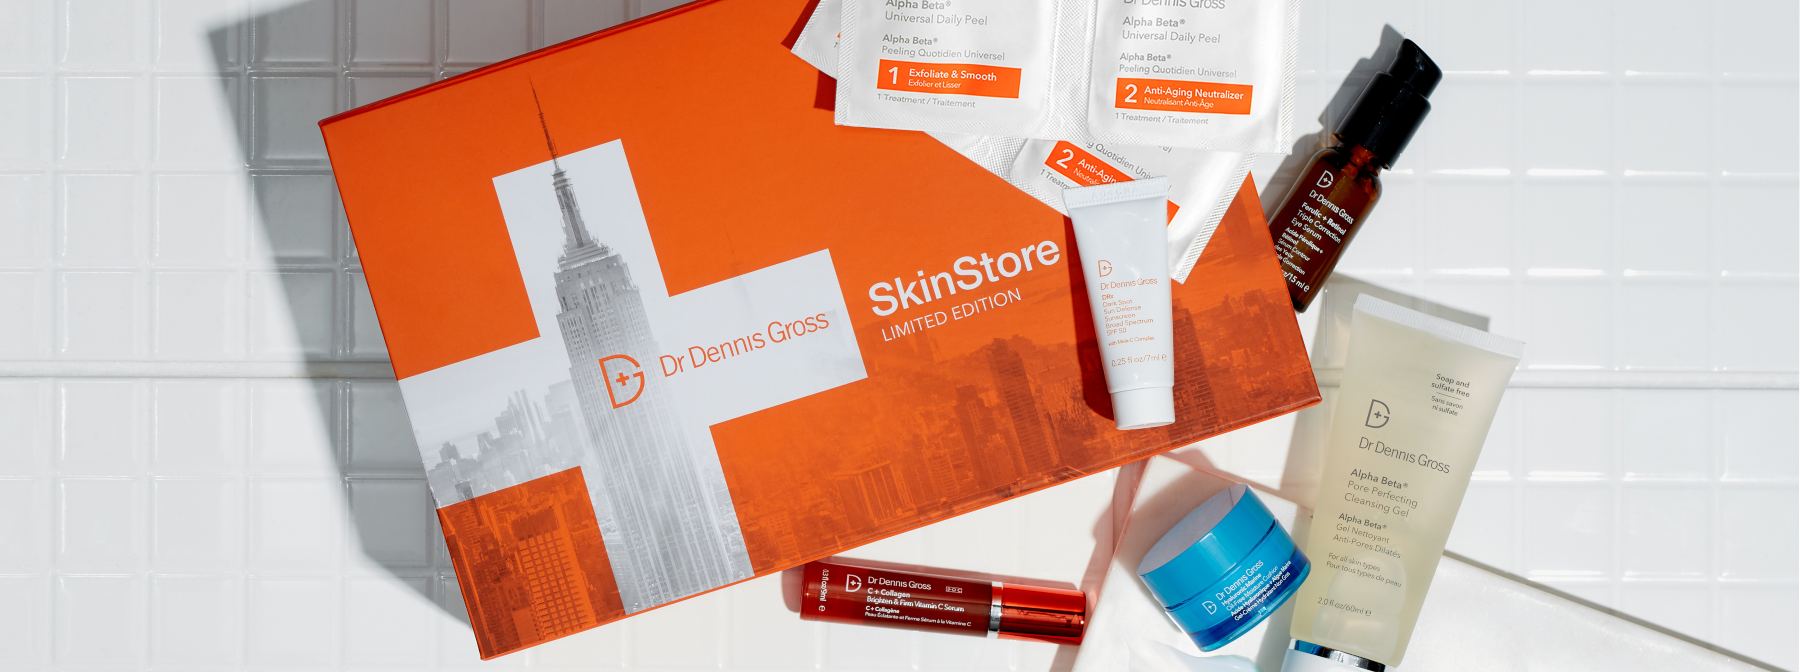 What’s In The SkinStore x Dr. Dennis Gross Limited Edition Box